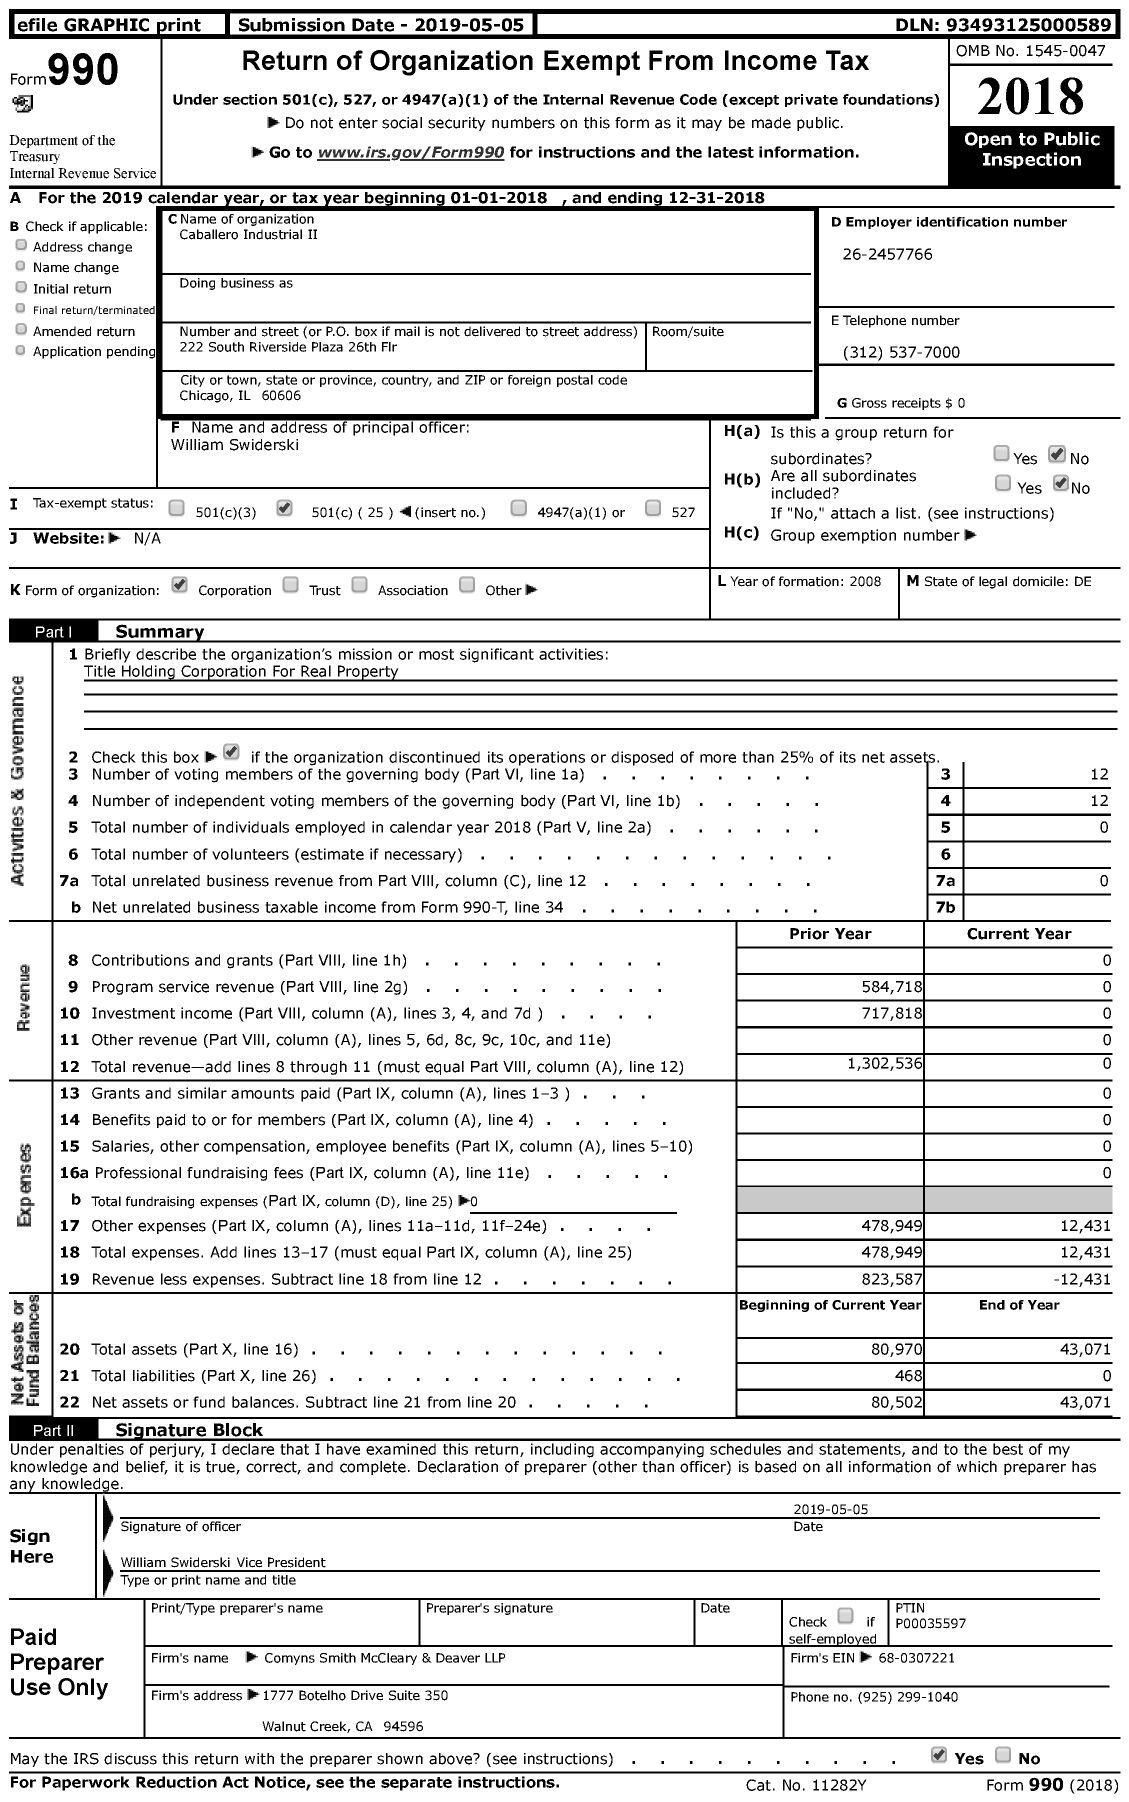 Image of first page of 2018 Form 990 for Caballero Industrial II